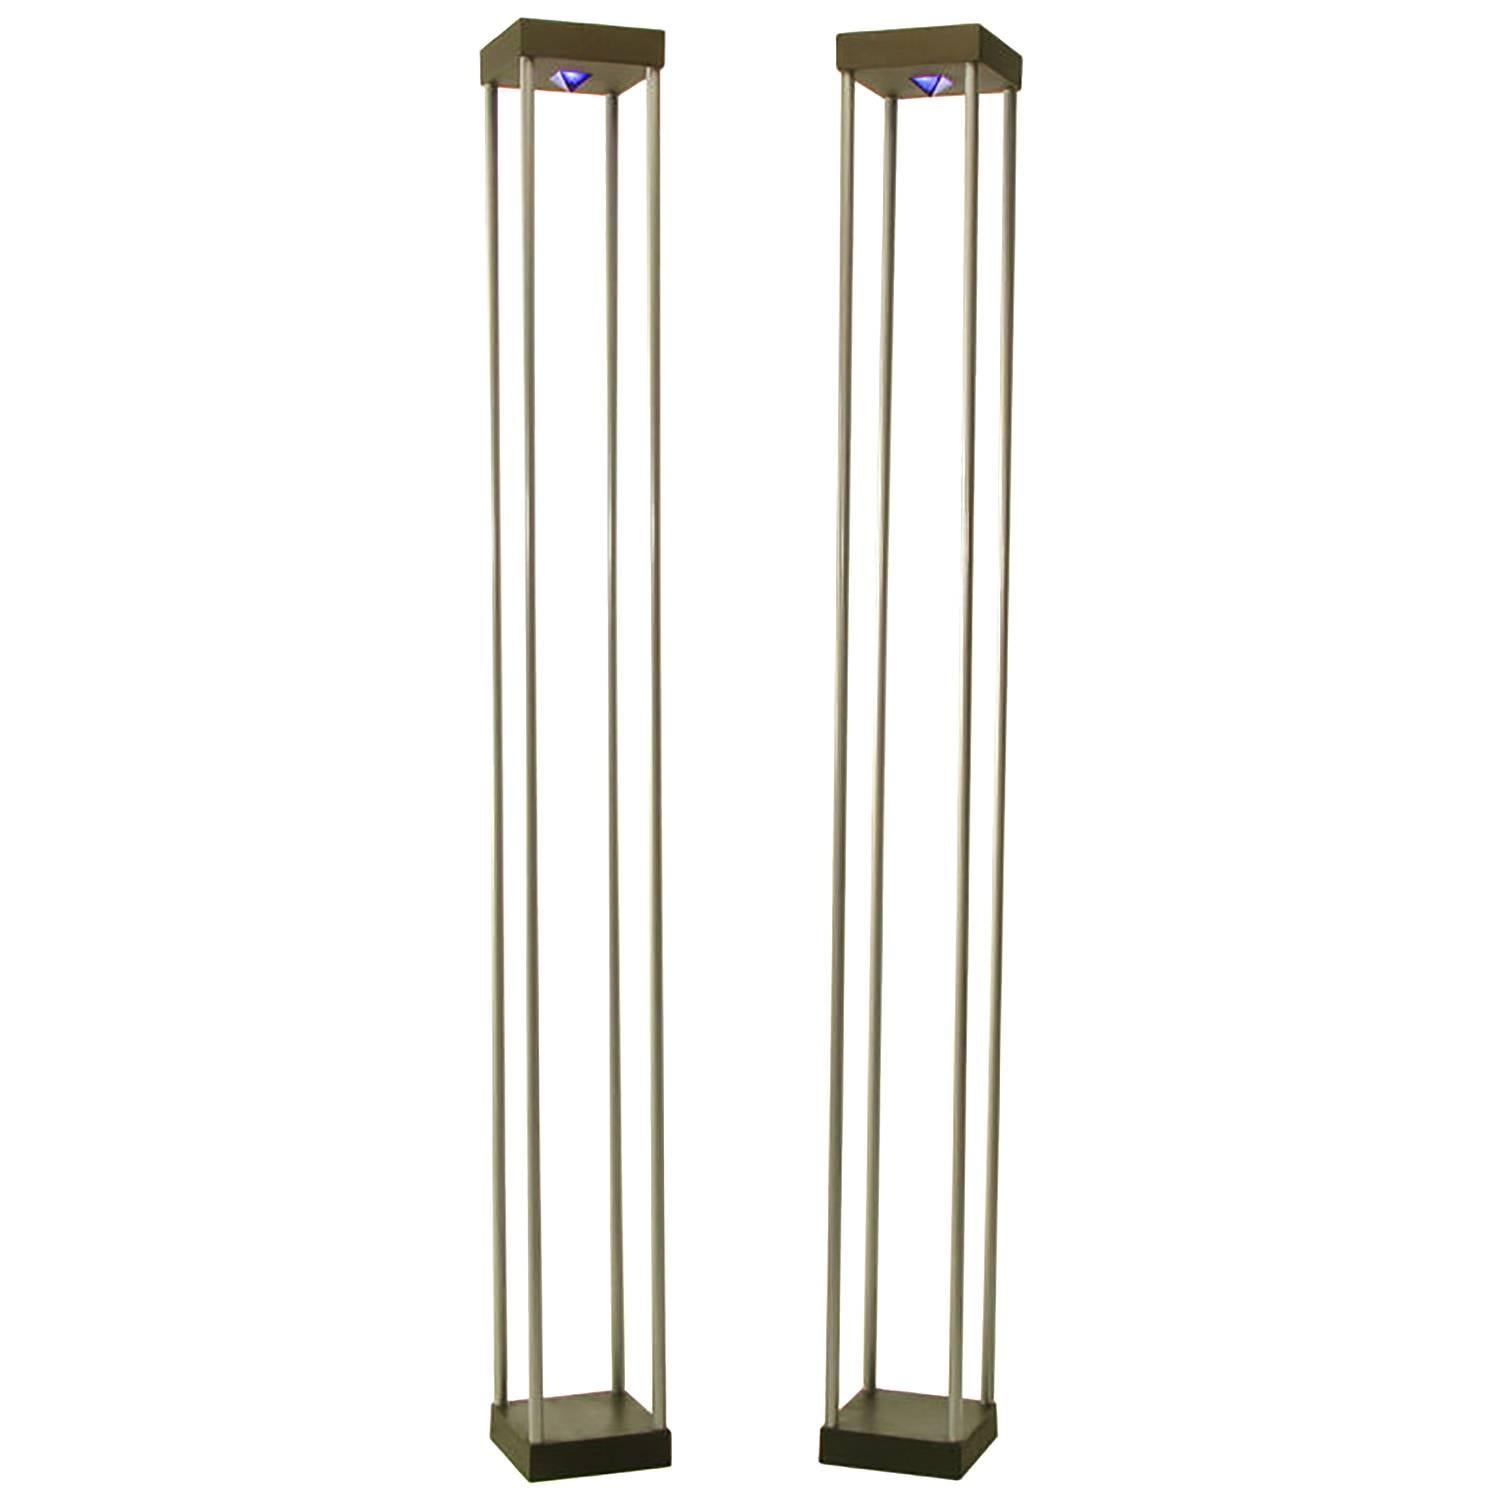 Pair of Memphis-Style Postmodern Floor Lamps with Cobalt Blue Glass Pyramids For Sale